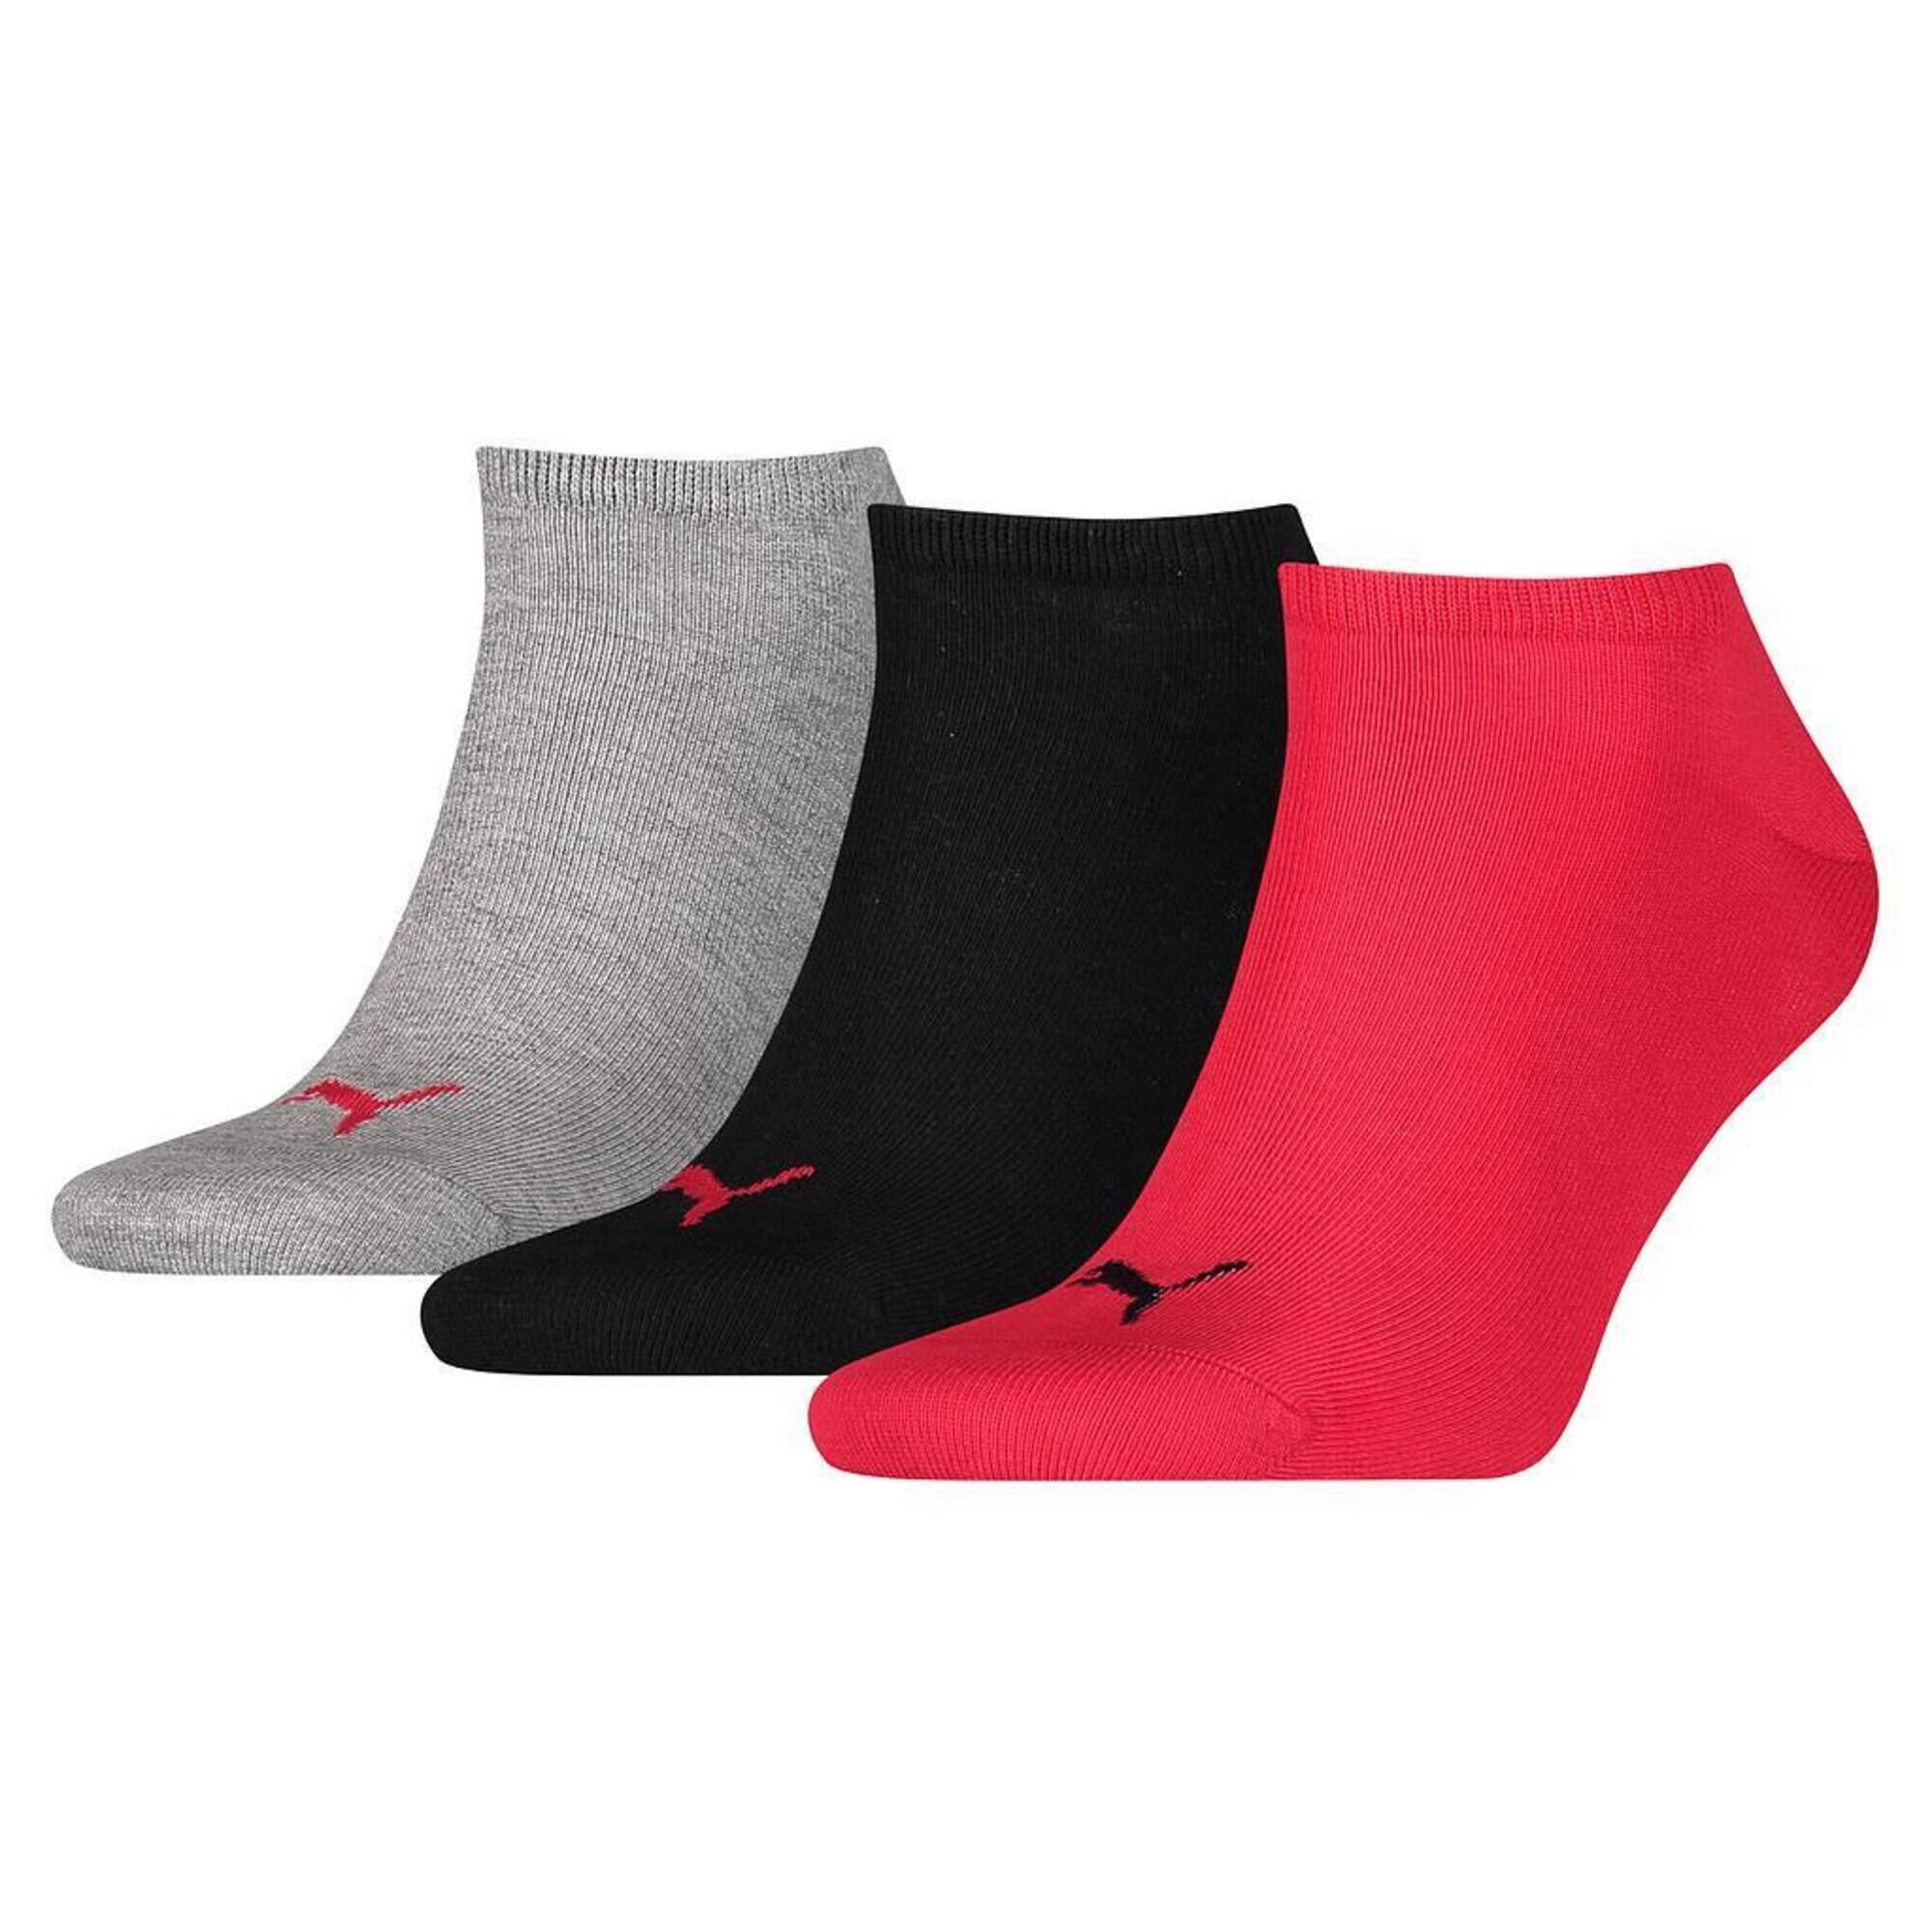 PUMA Unisex Adult Invisible Socks (Pack of 3) (Black/Red/Grey)